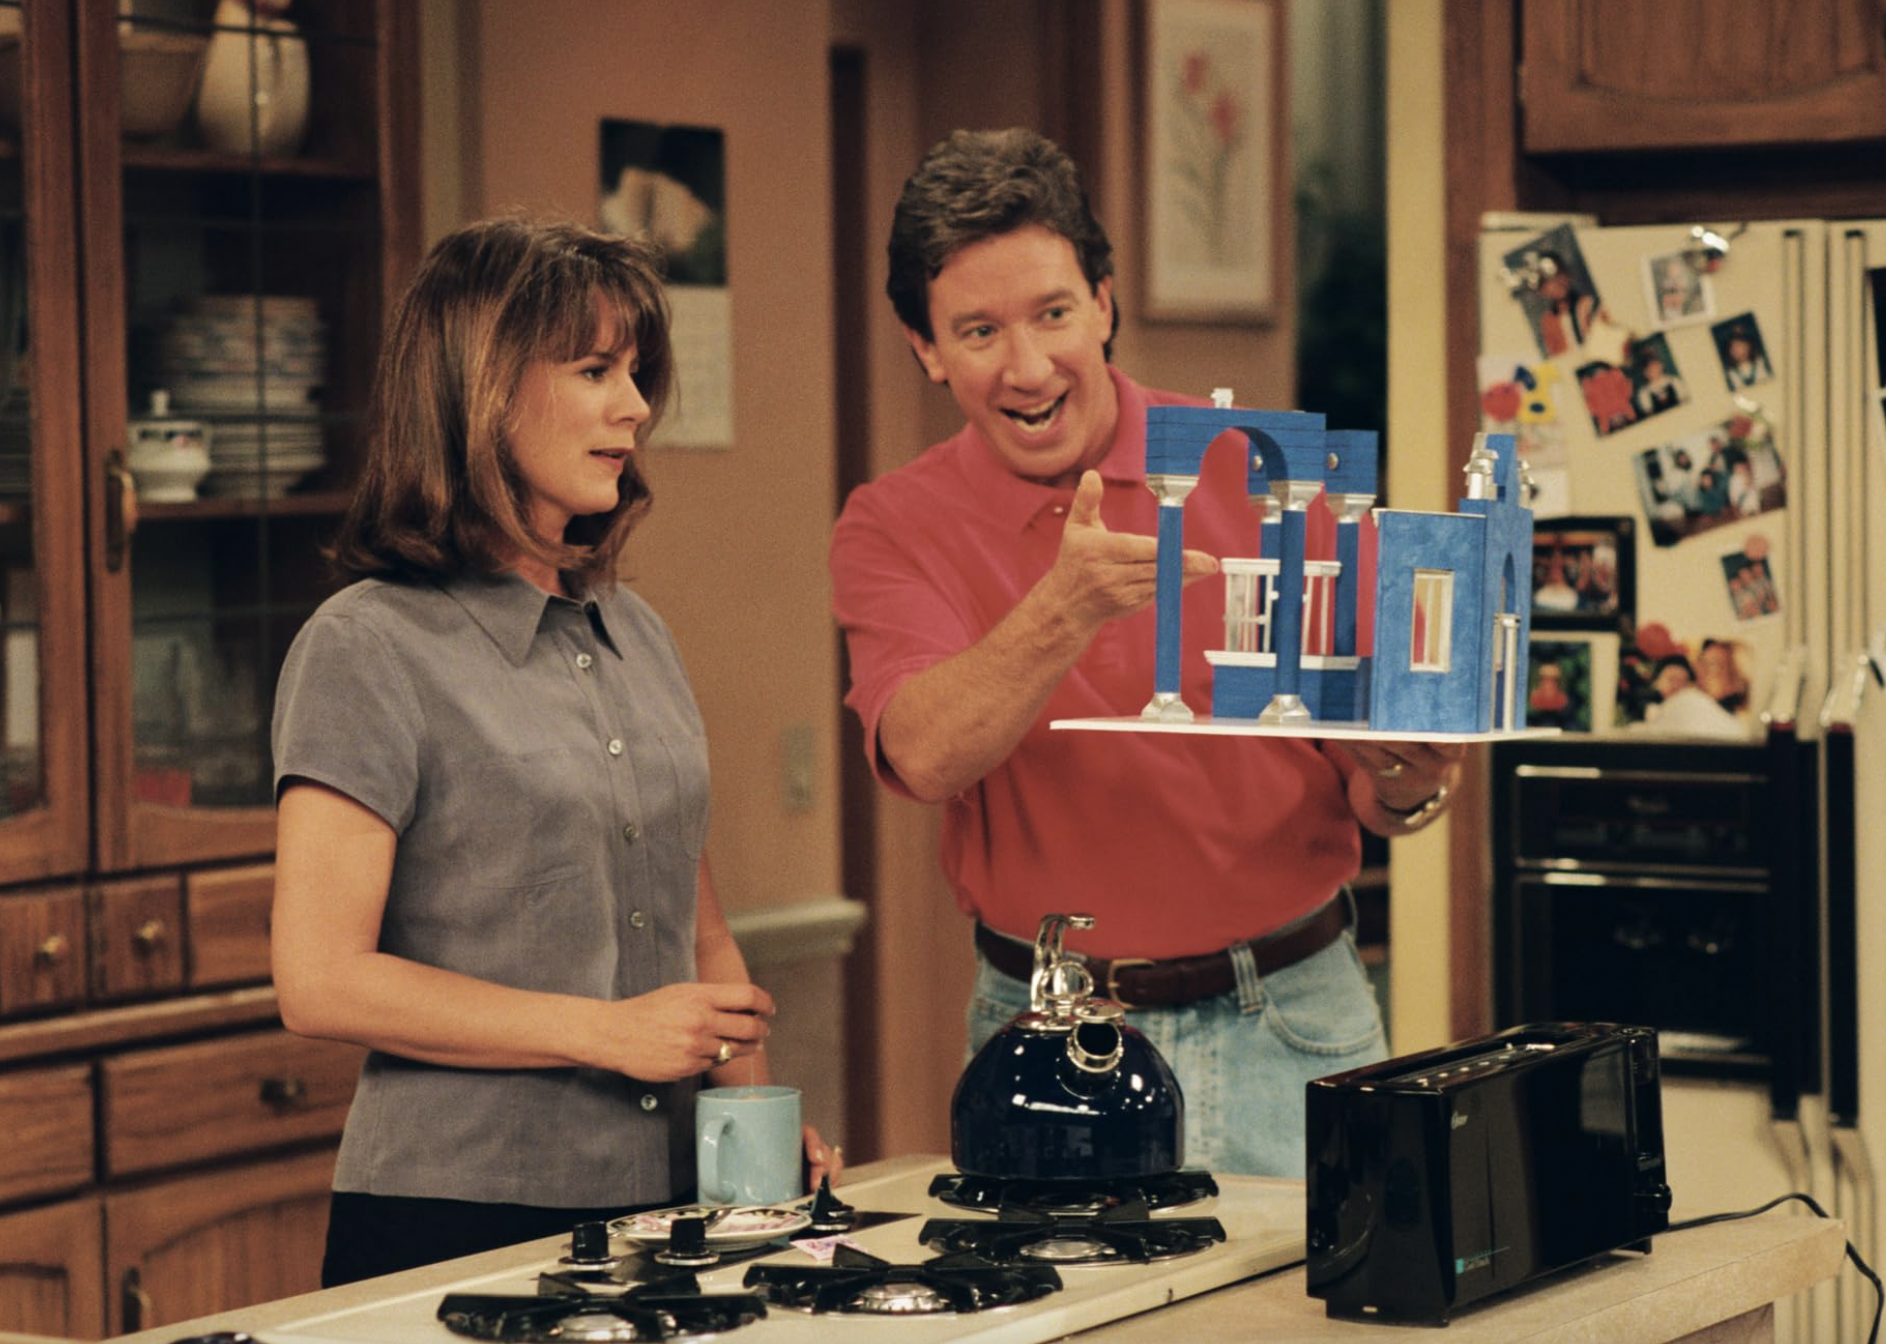 Tim Allen and Patricia Richardson in "Home Improvement".